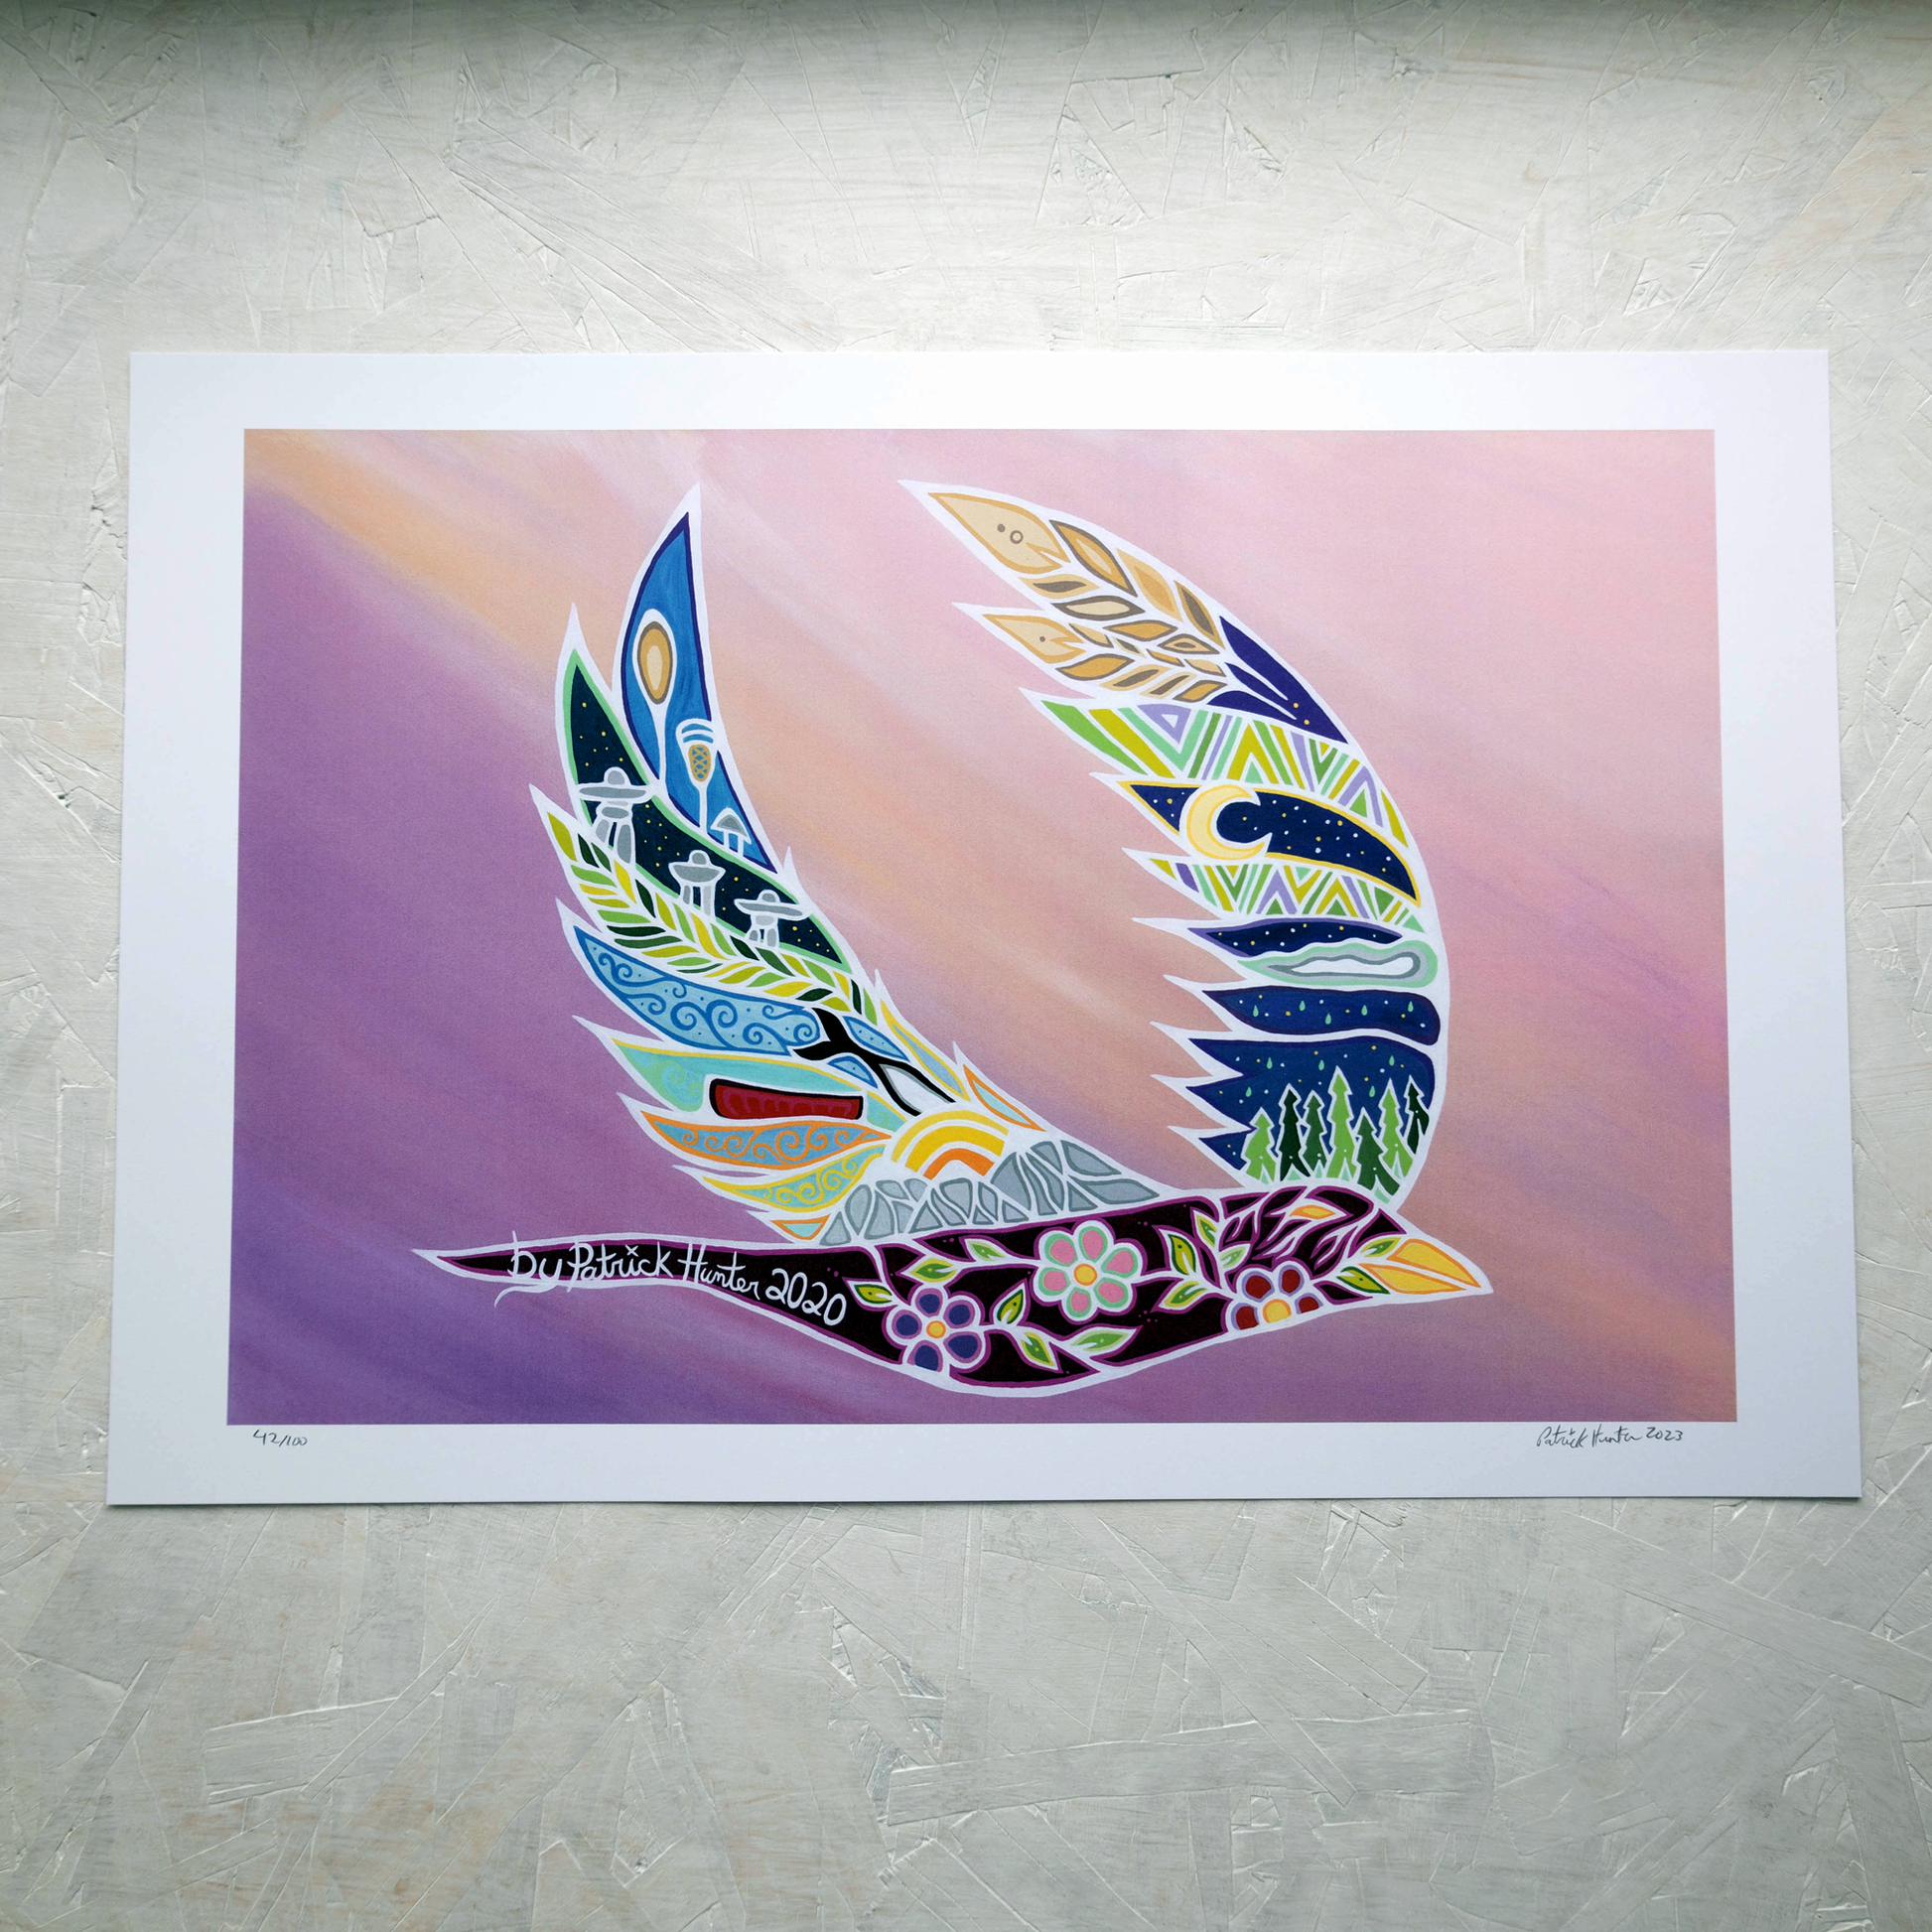 Print of Patrick Hunter's painting of a bird in flight with various landscapes and cultural icons in the wings, in woodland art style.